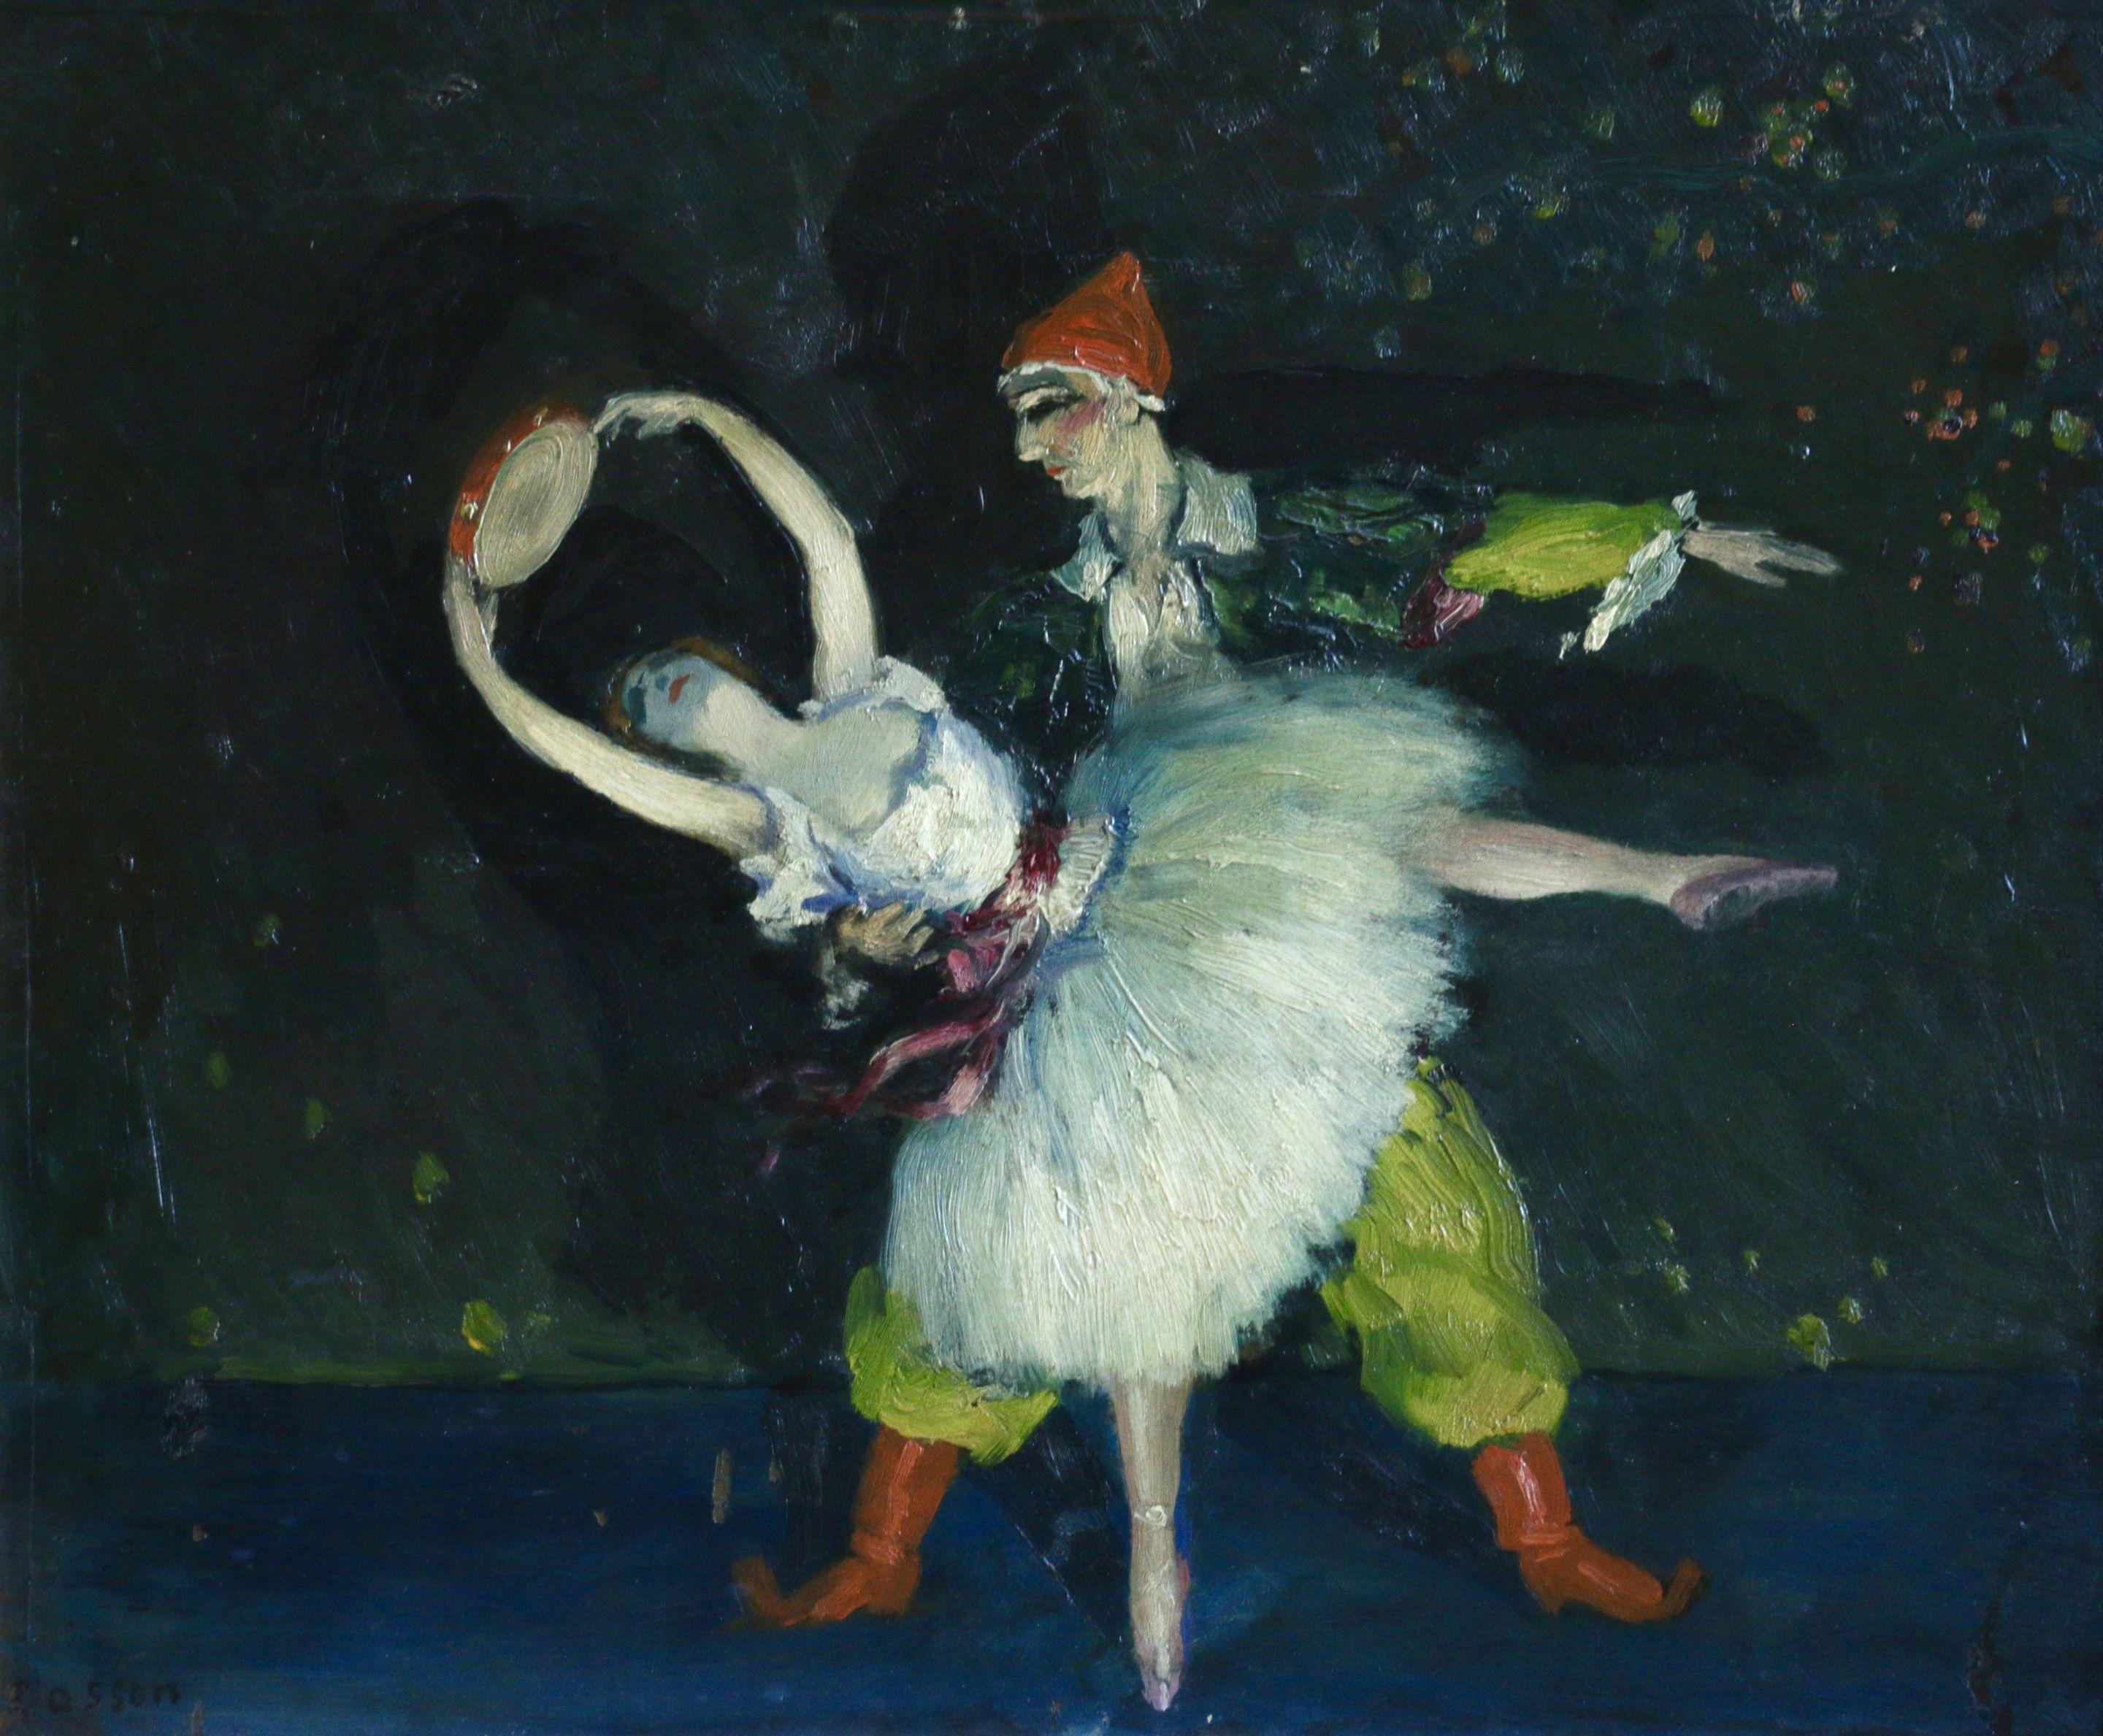 Pierrot & Dancer - 20th Century Oil, Figures Dancing in Interior by Cosson - Painting by Jean-Louis-Marcel Cosson